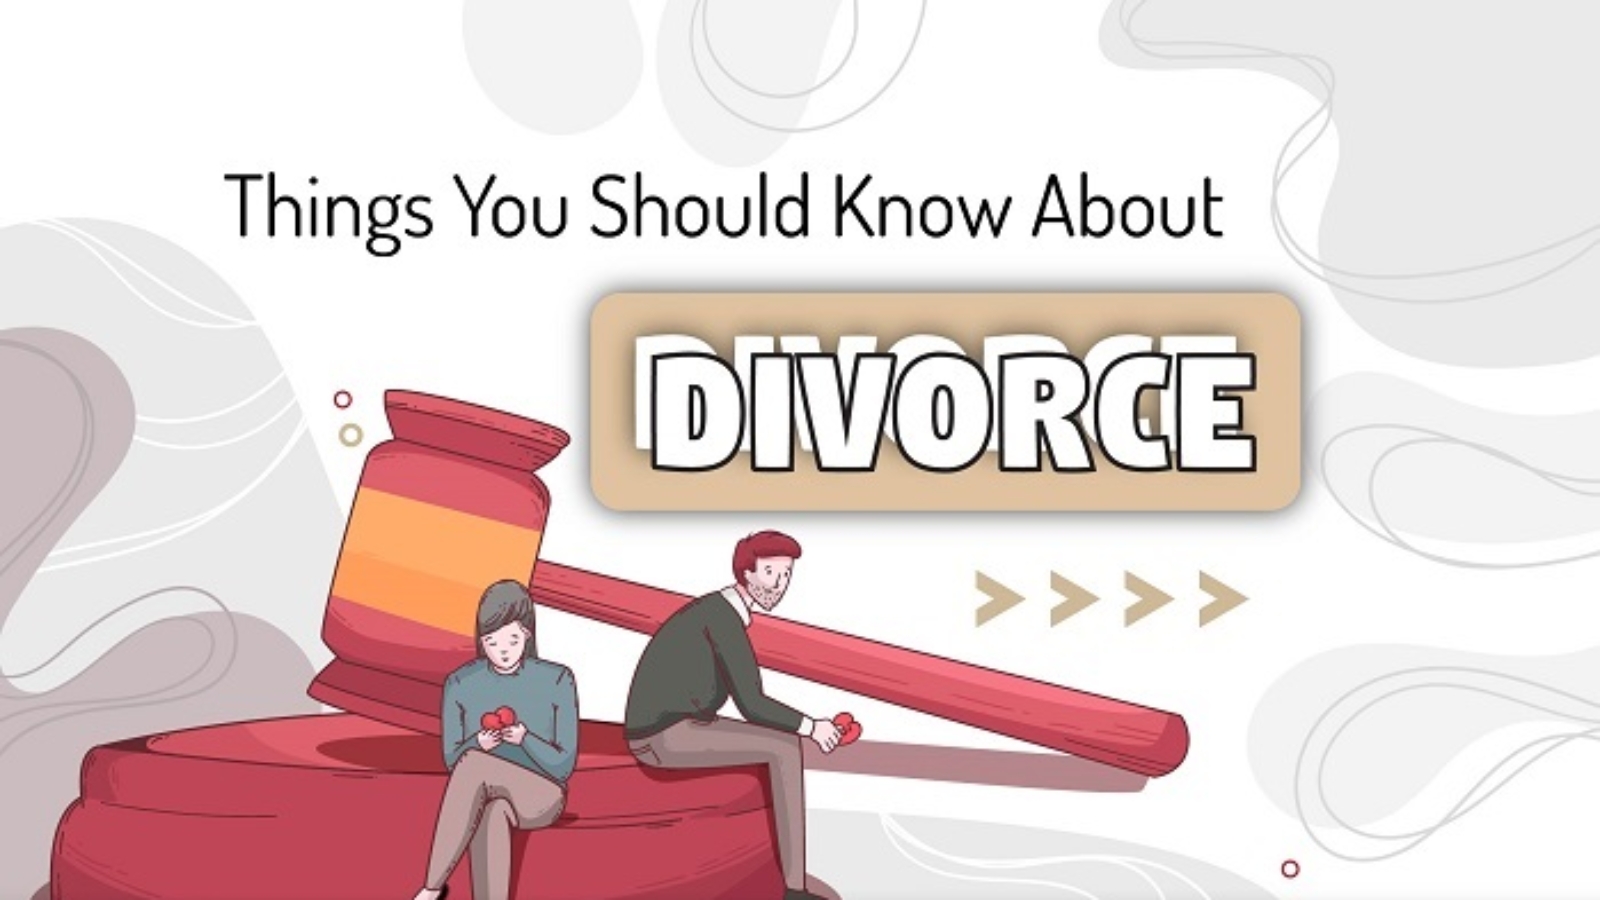 Thinks You Should Know About Divorce